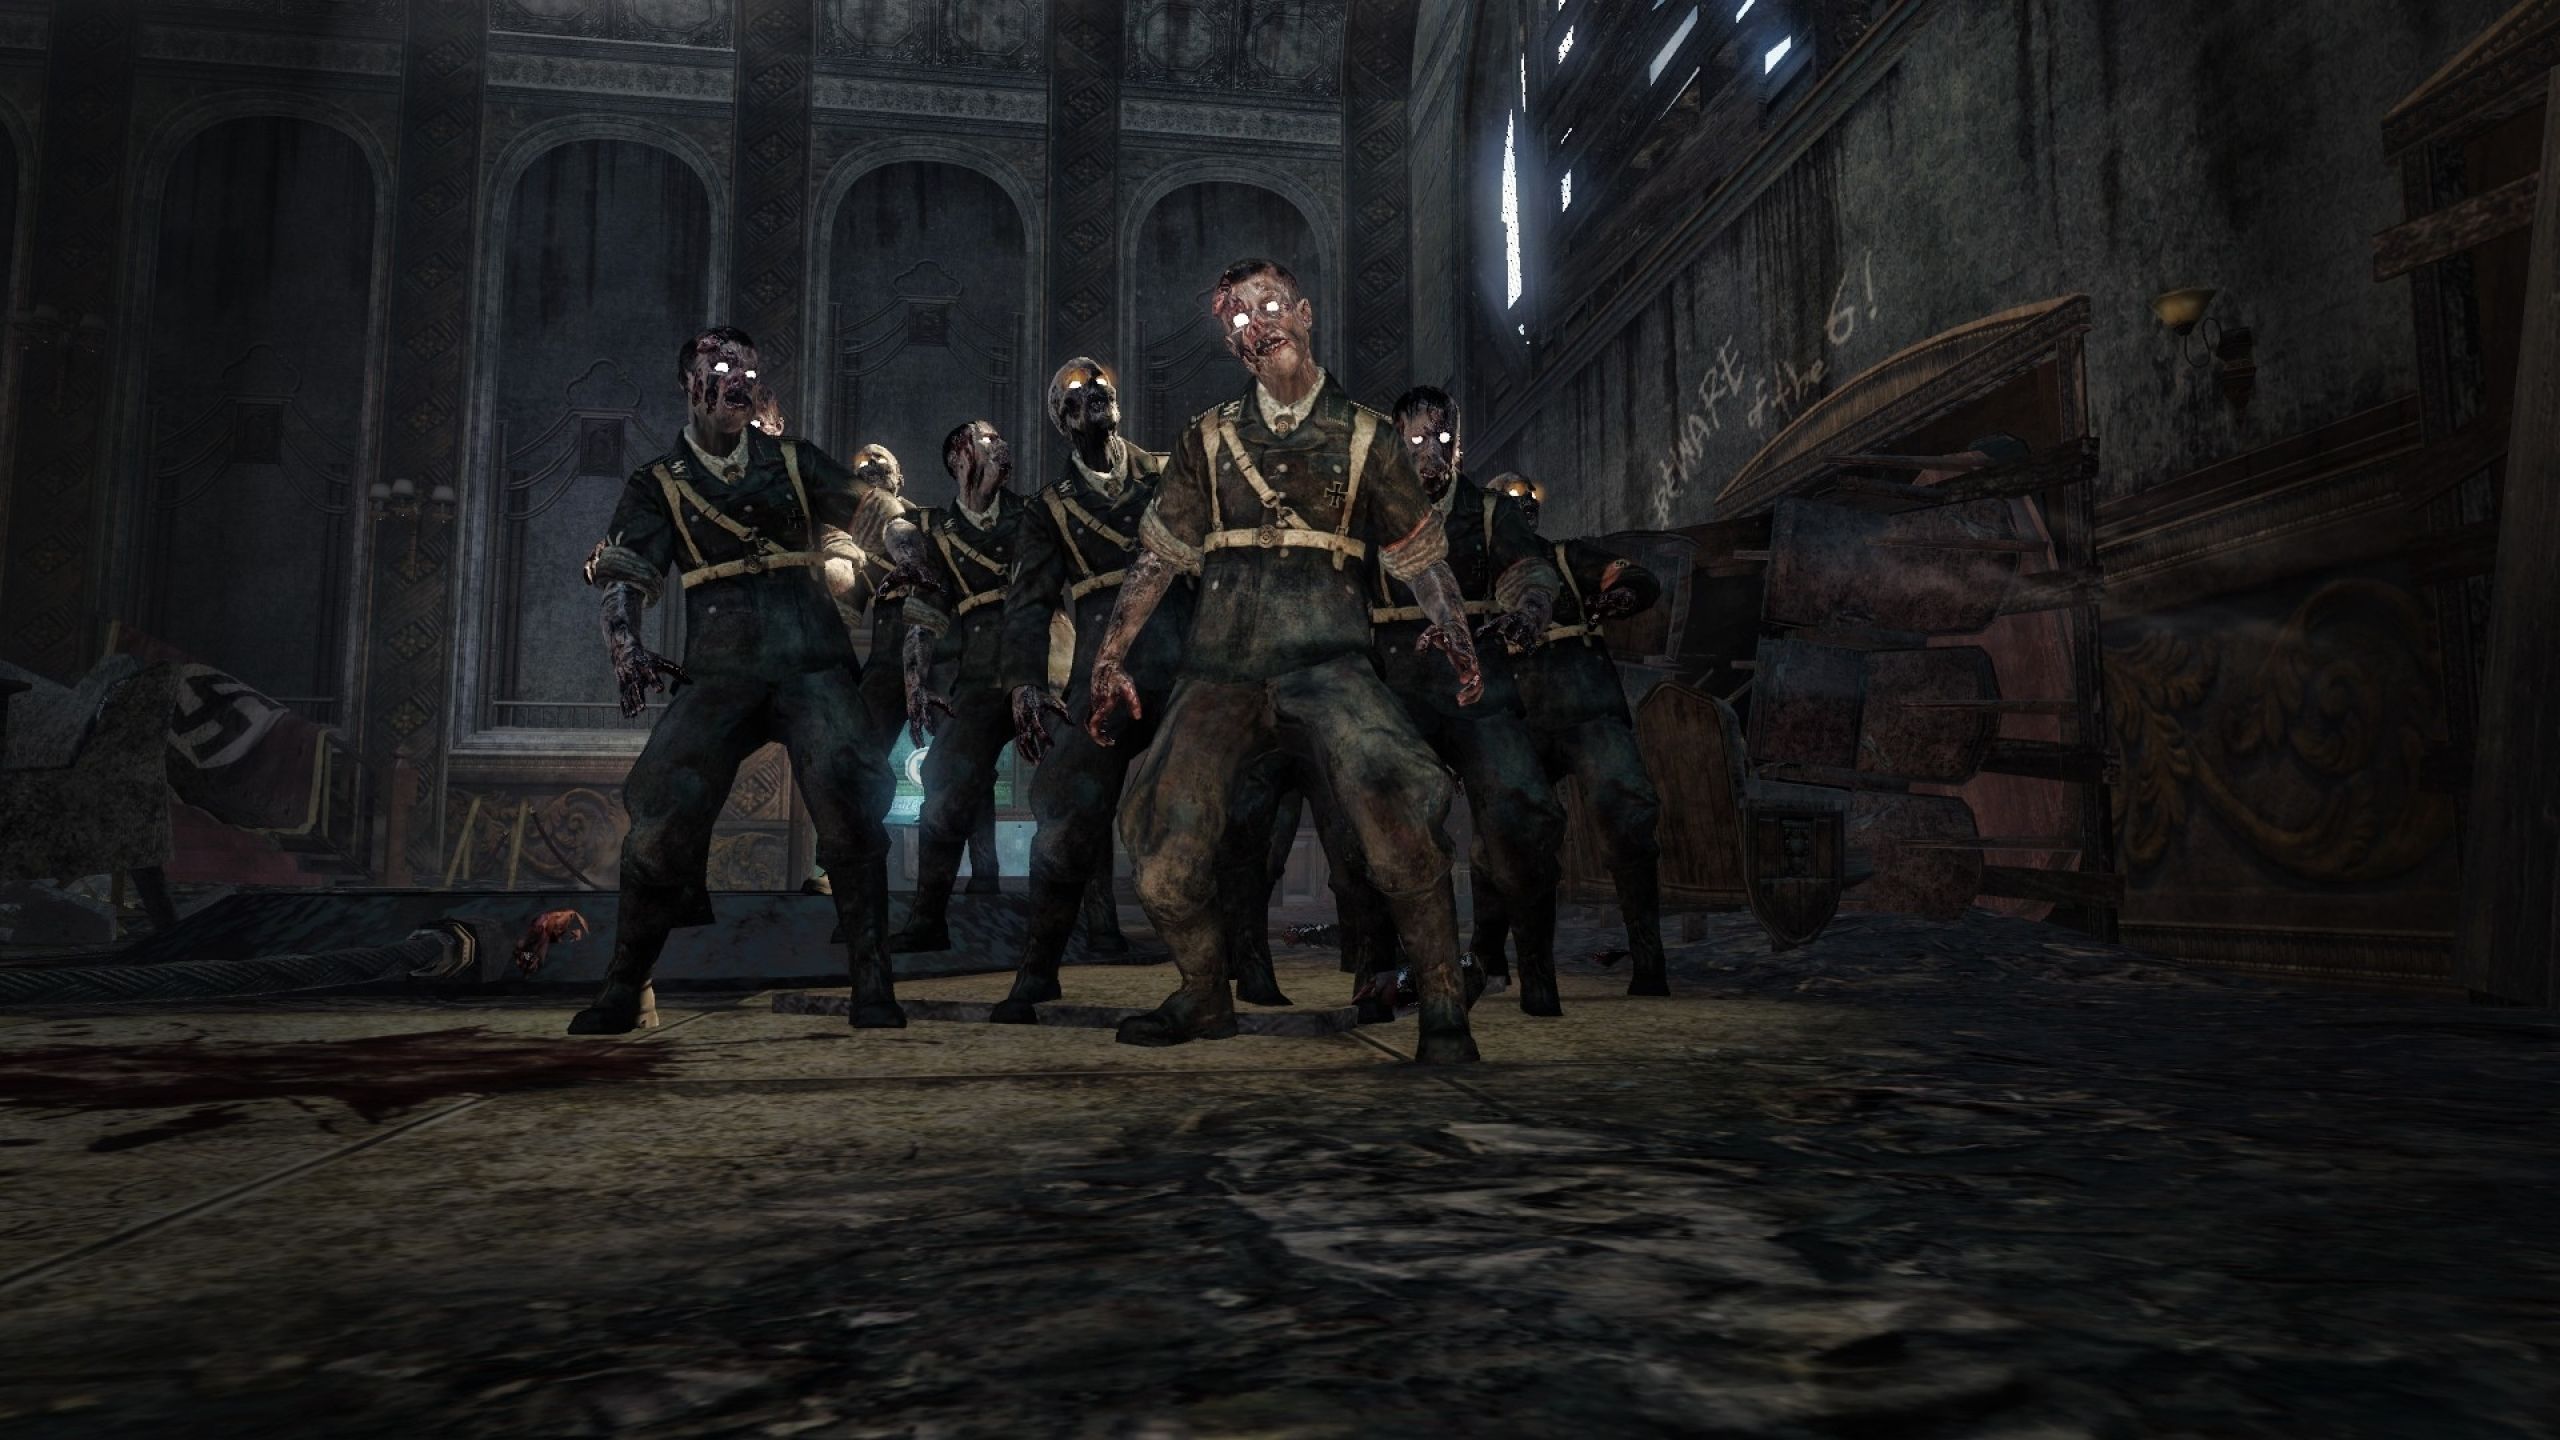 Free download zombies call of duty black ops Best WallpaperTop